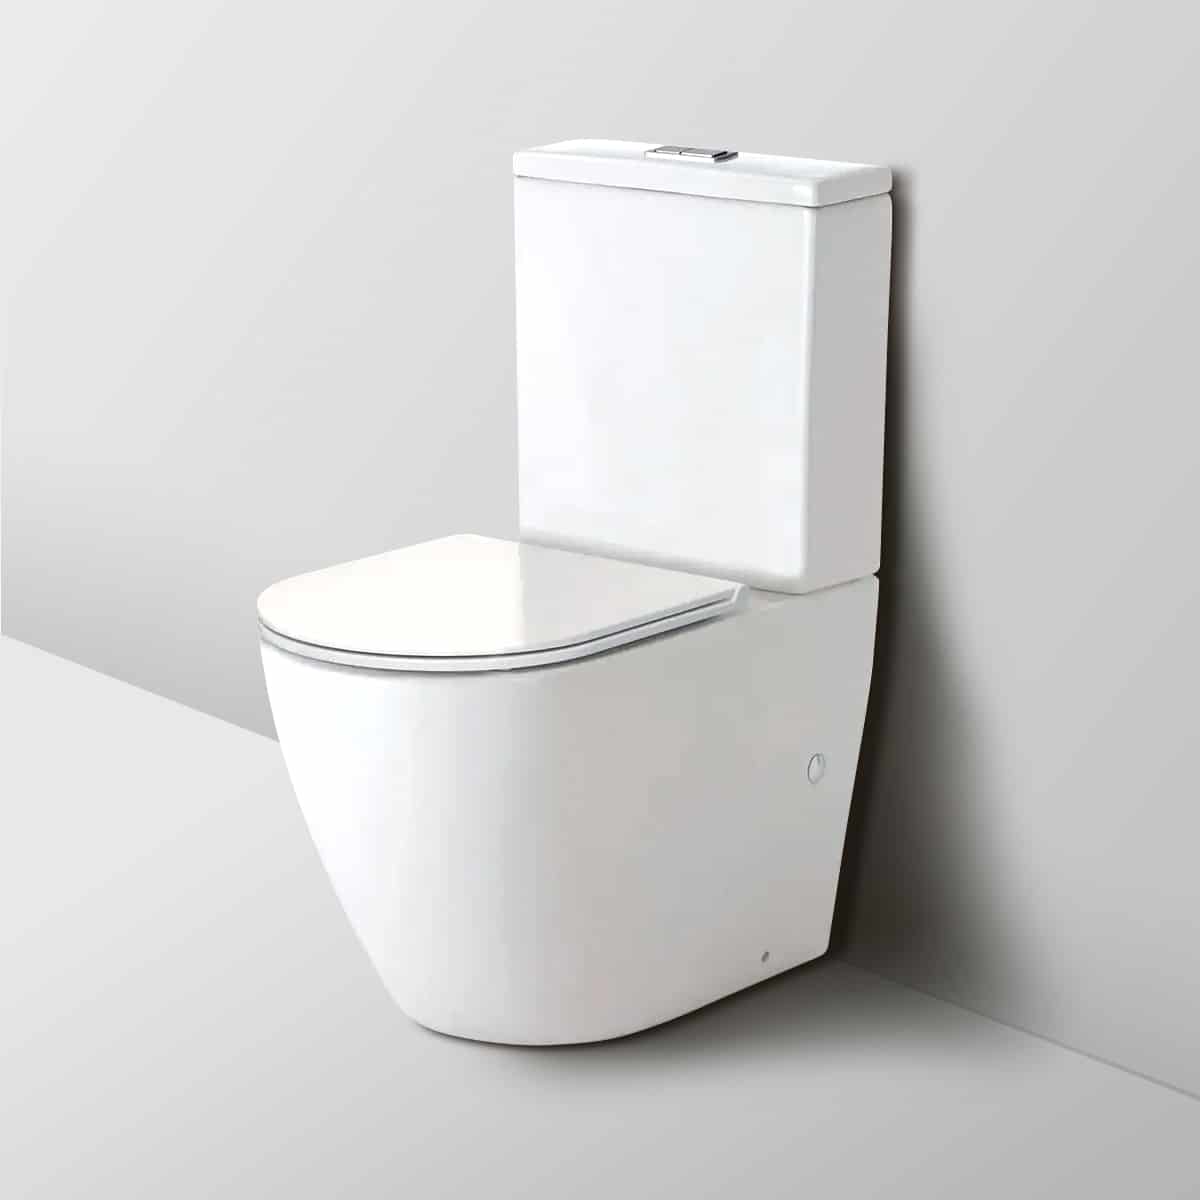 Koko Slim Seat Back-to-Wall Toilet Suite S Trap